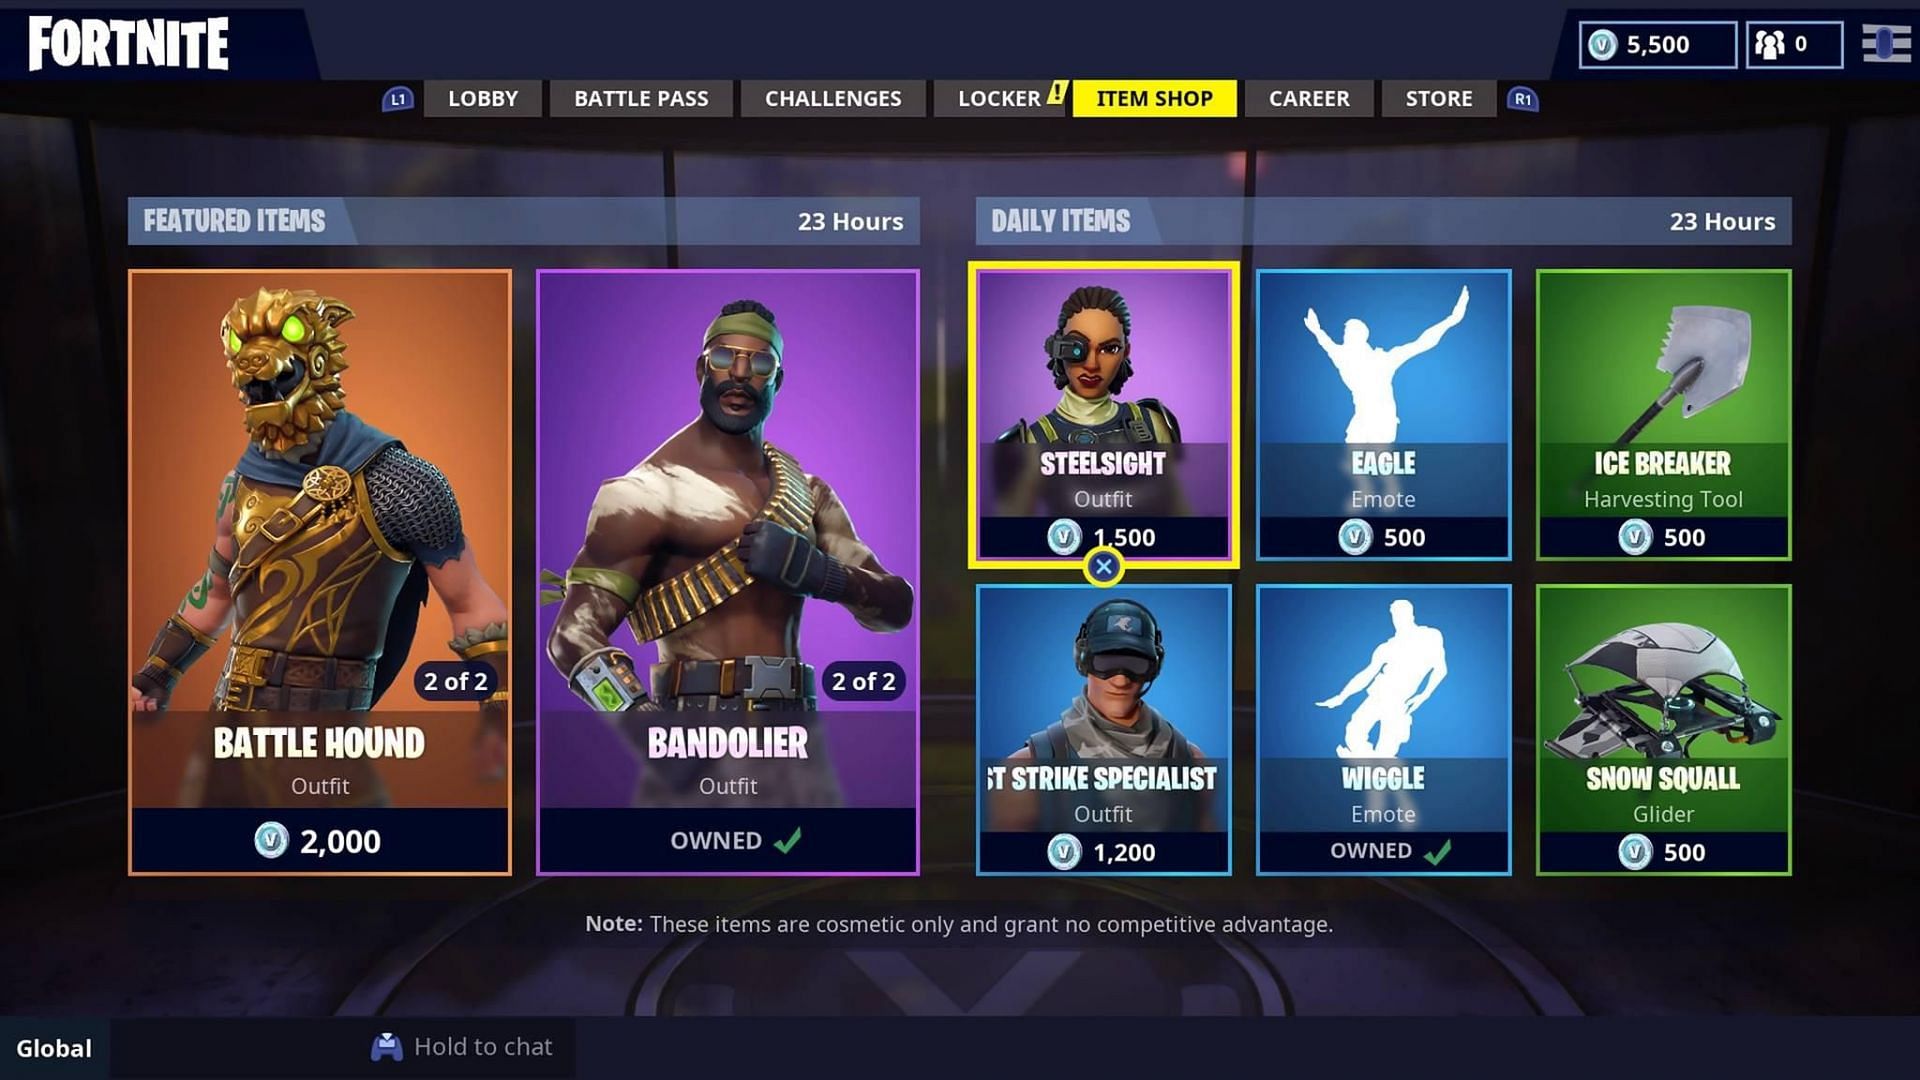 The FTC Fortnite settlement forced Epic Games to adjust the Item Shop (Image via Epic Games)